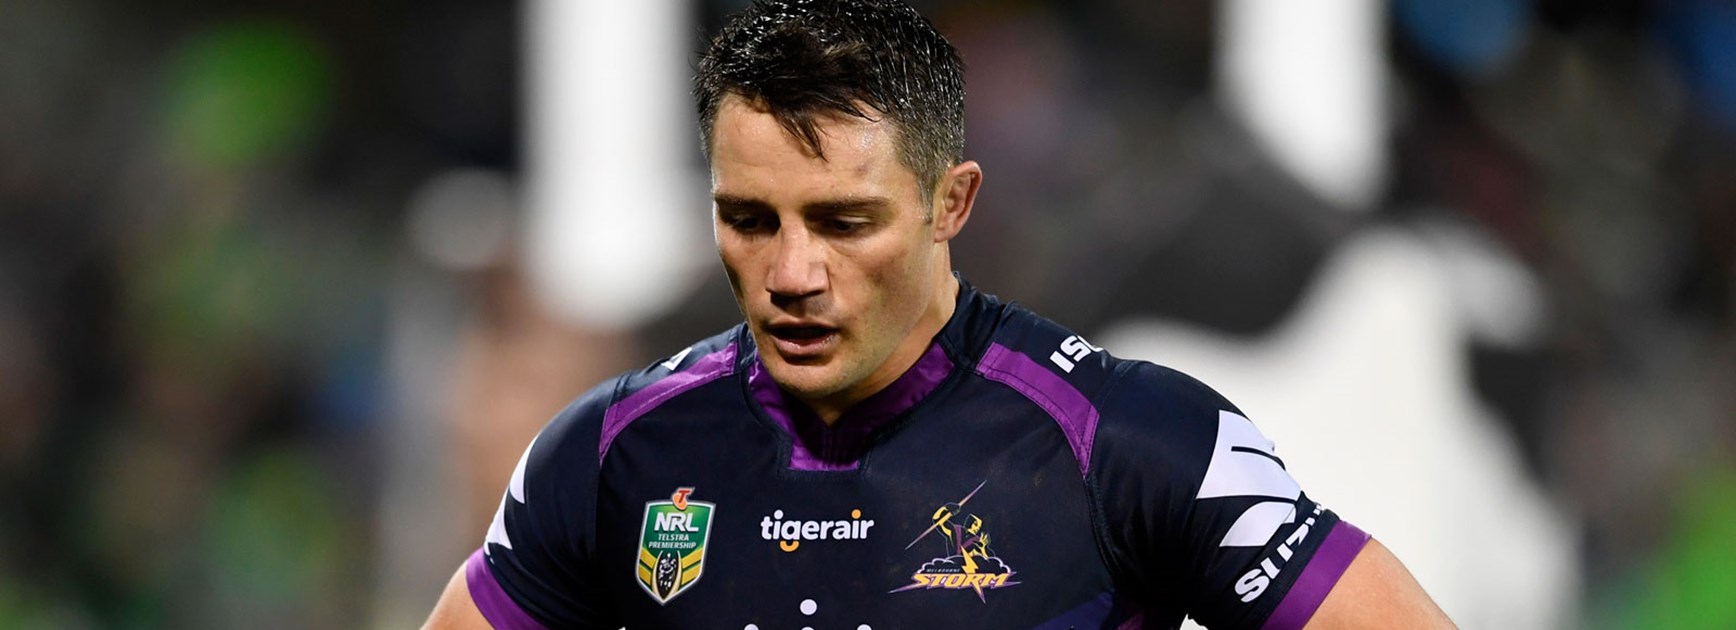 Finals still a learning curve for Cronk